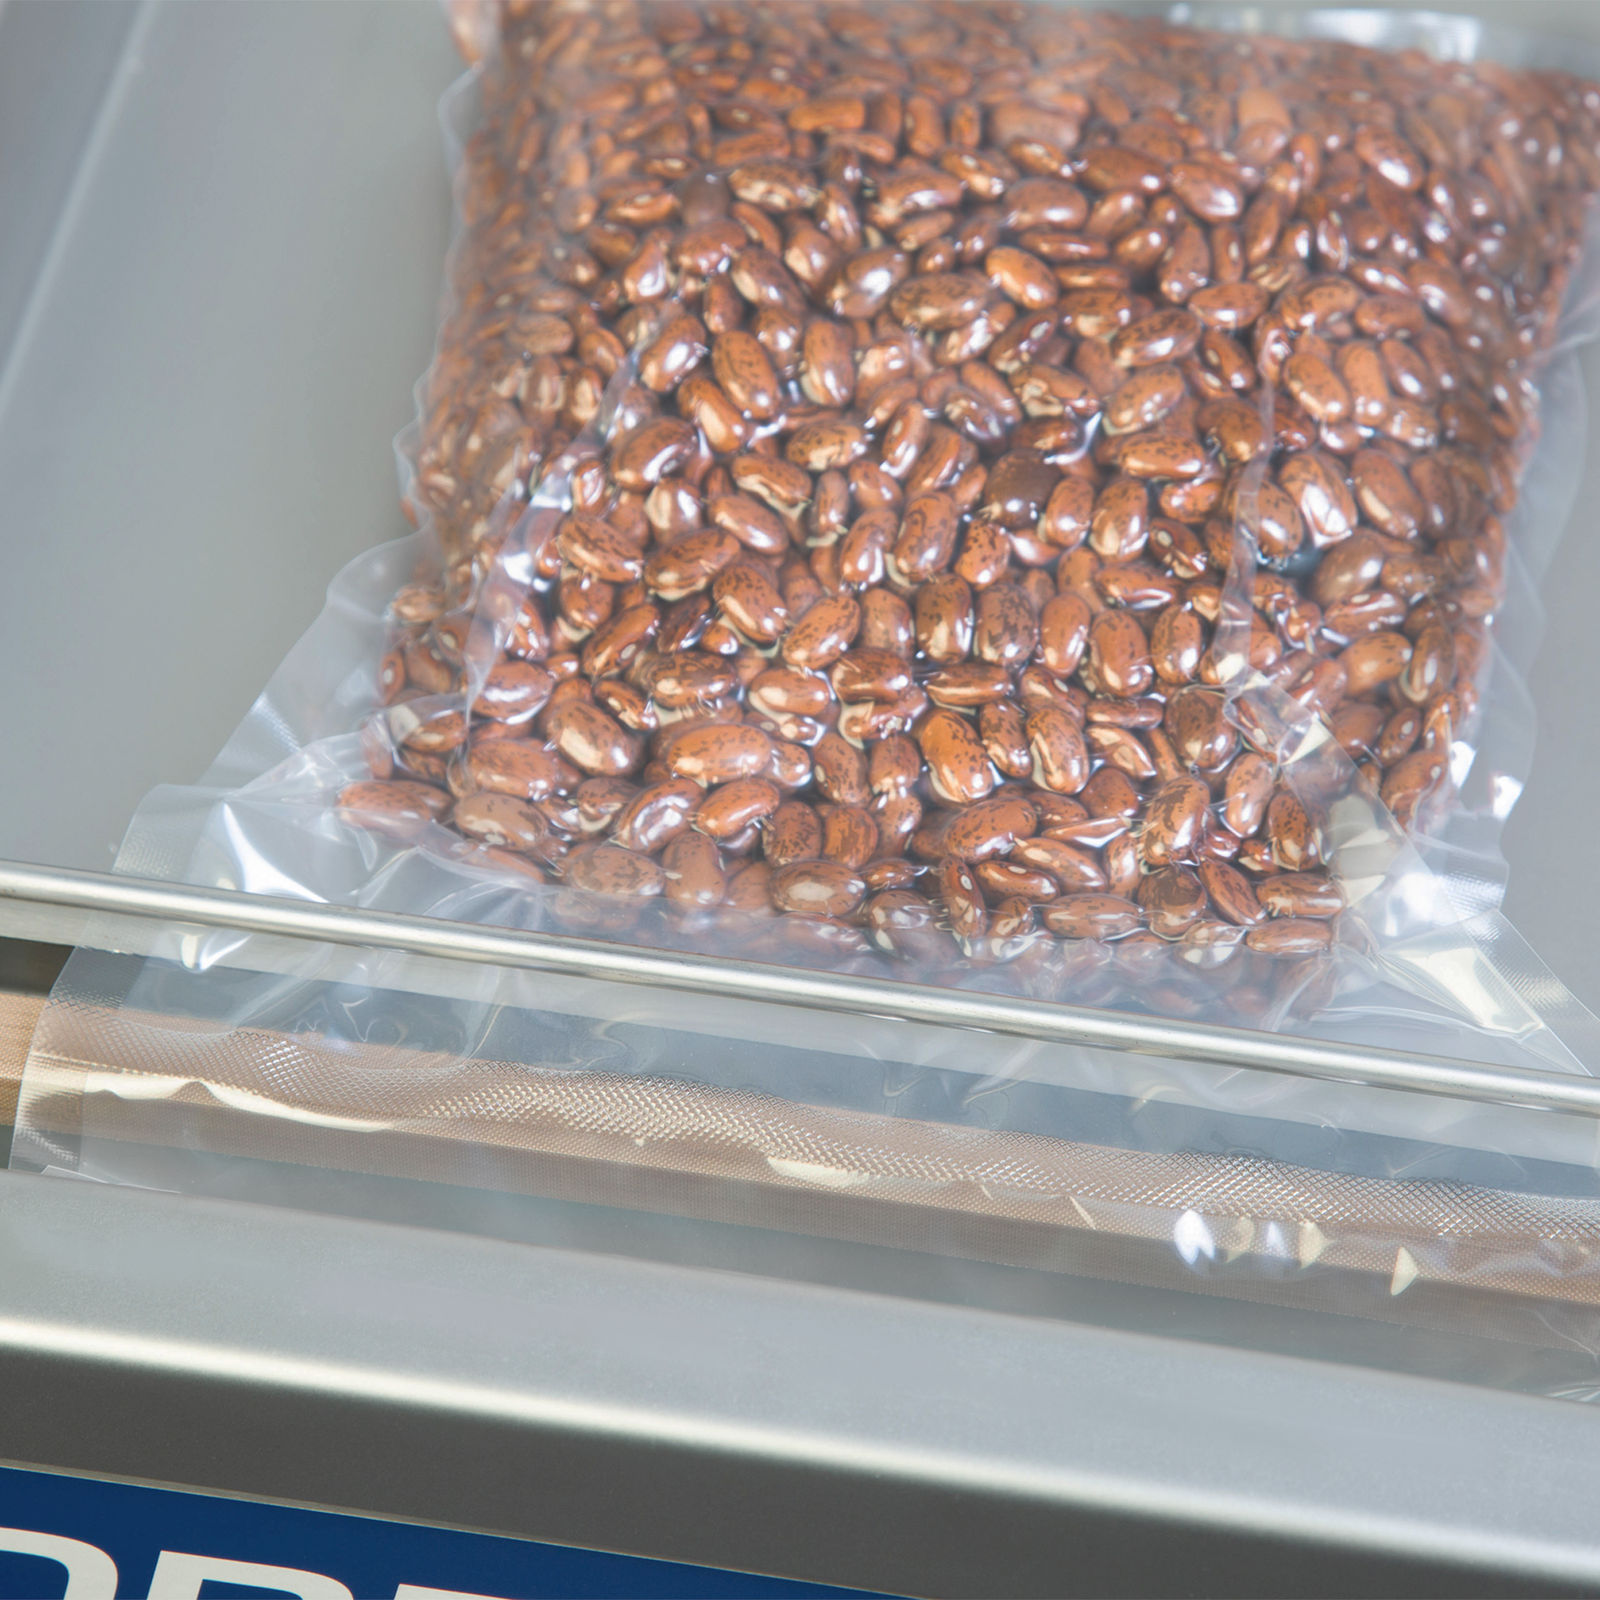 Detail a sealable vacuumed bag with red bean after using the stainless steel tabletop commercial chamber vacuum sealer with one seal bar. The seal of the vacuumed bag can be appreciated as well as the position on the sealing bar